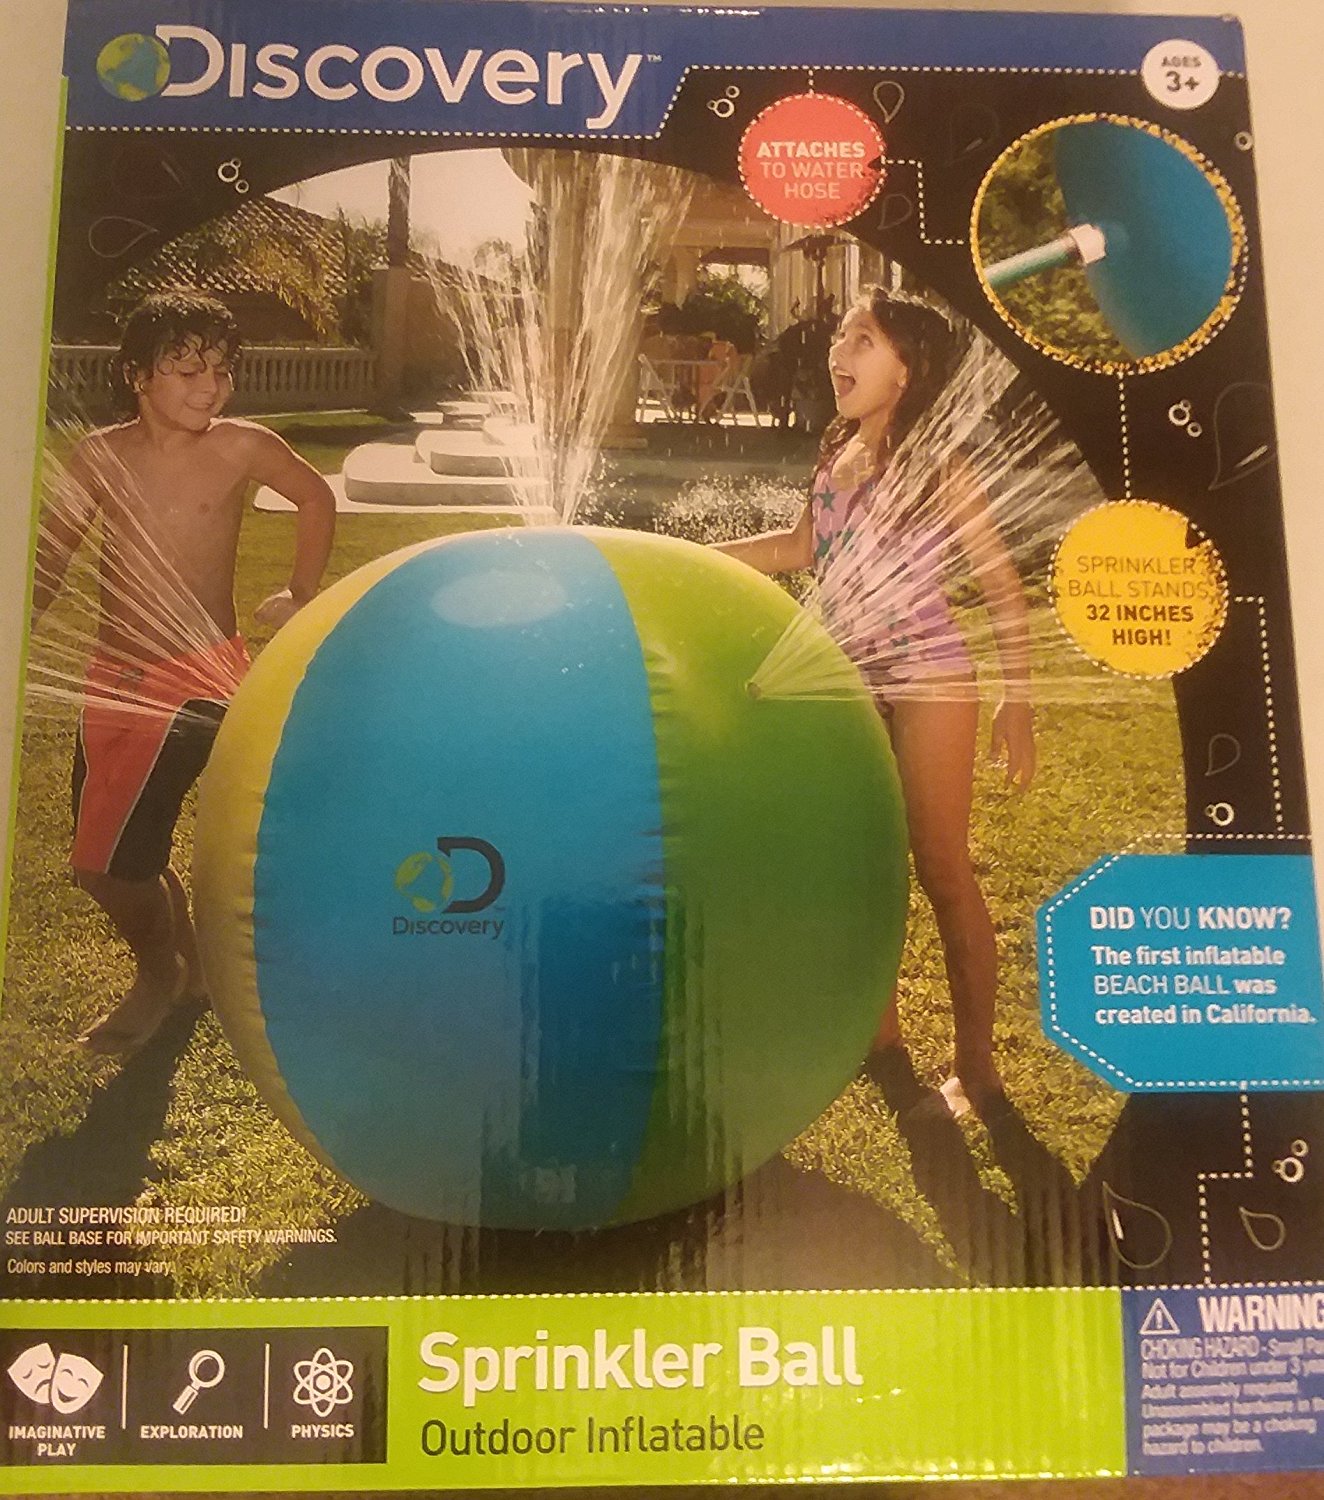 Amazon.com: Discovery Kids Inflatable Sprinkler Ball - 32 inches ...